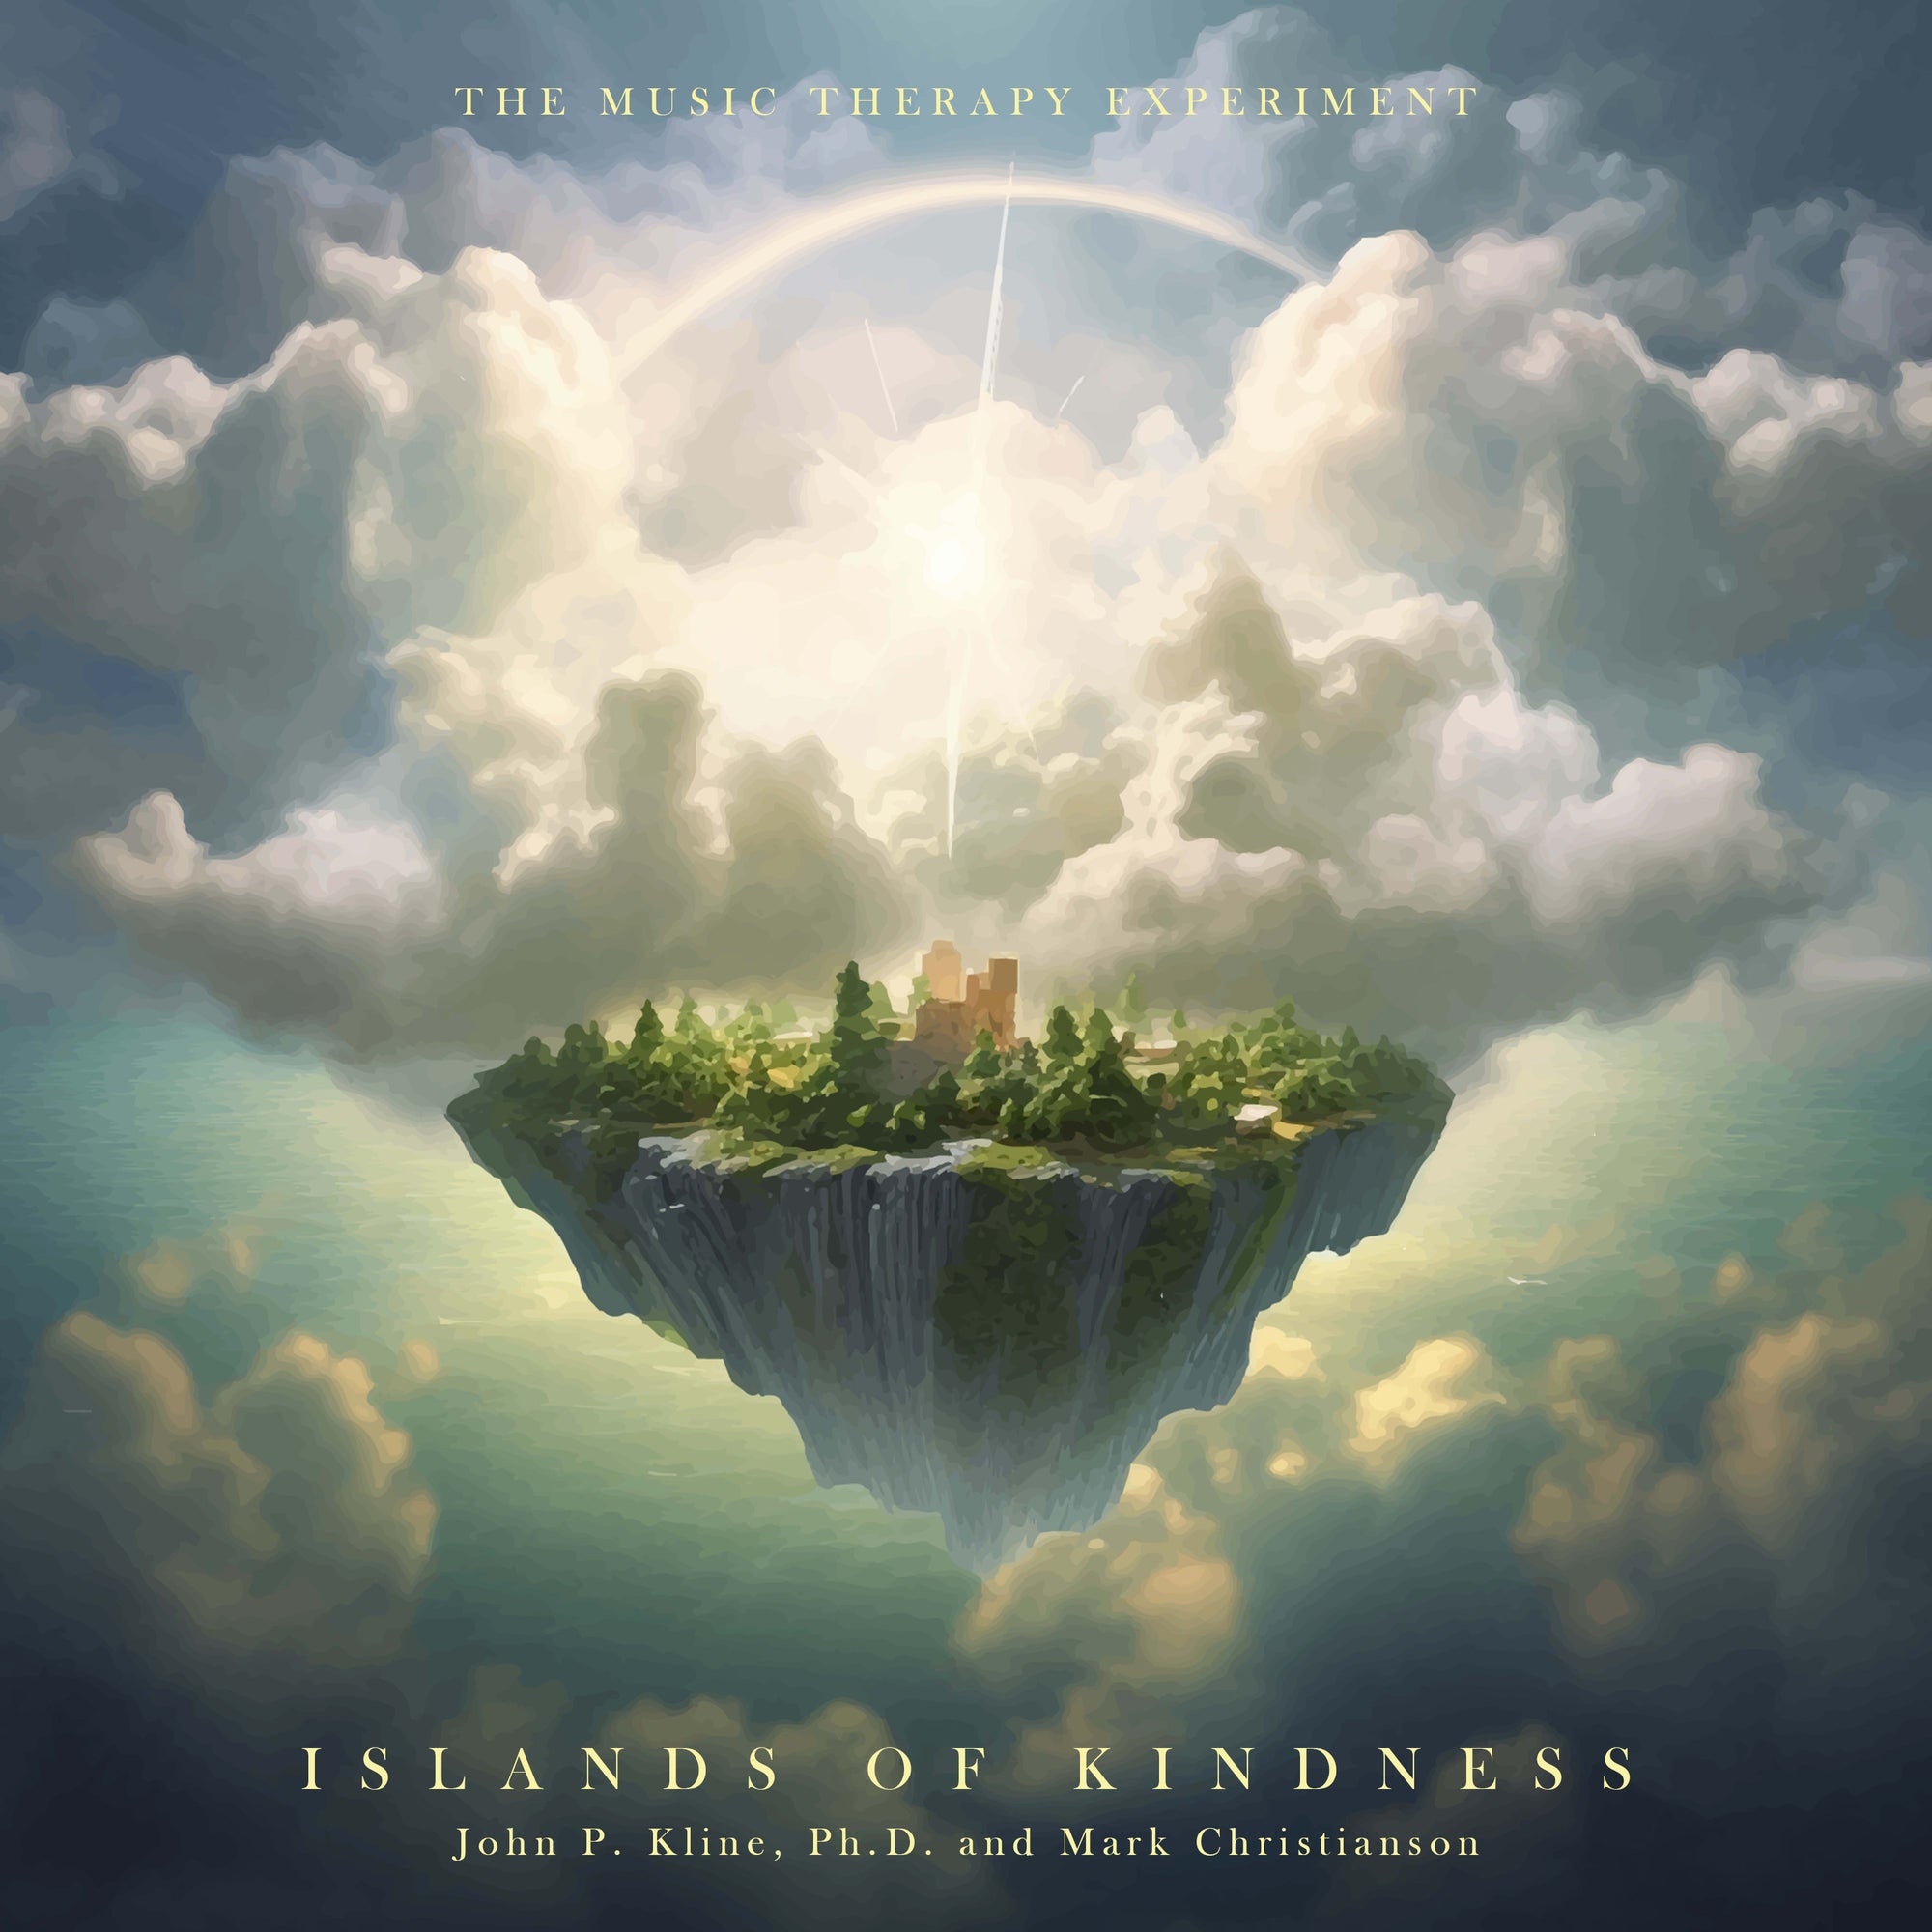 The Music Therapy Experiment - ‘Islands of Kindness’